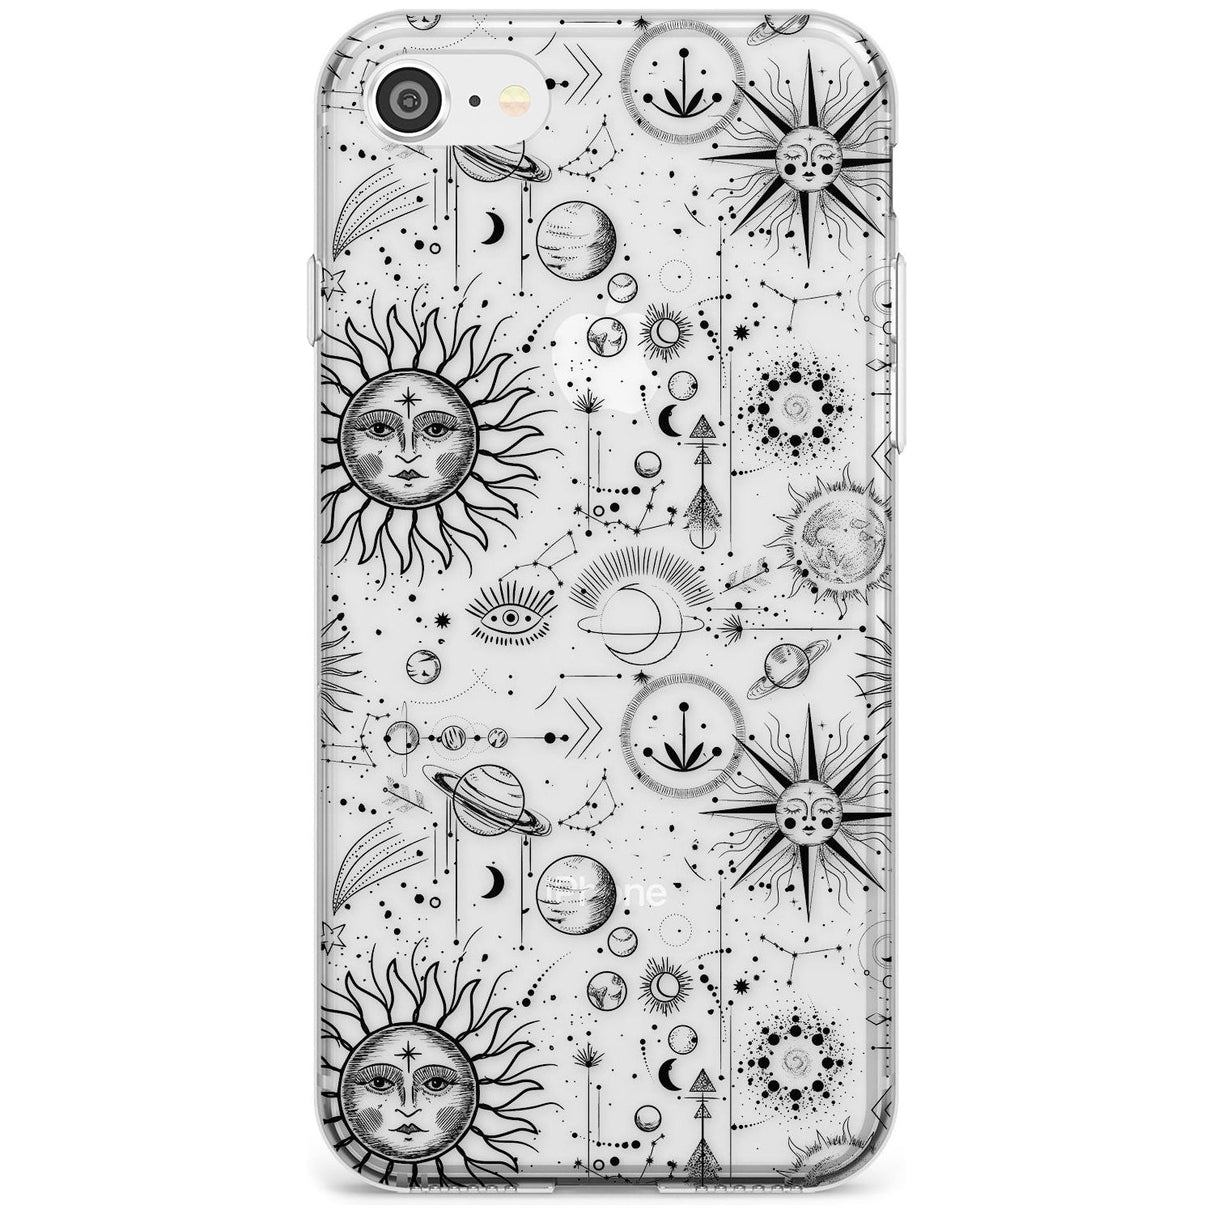 Suns & Planets Astrological Slim TPU Phone Case for iPhone SE 8 7 Plus